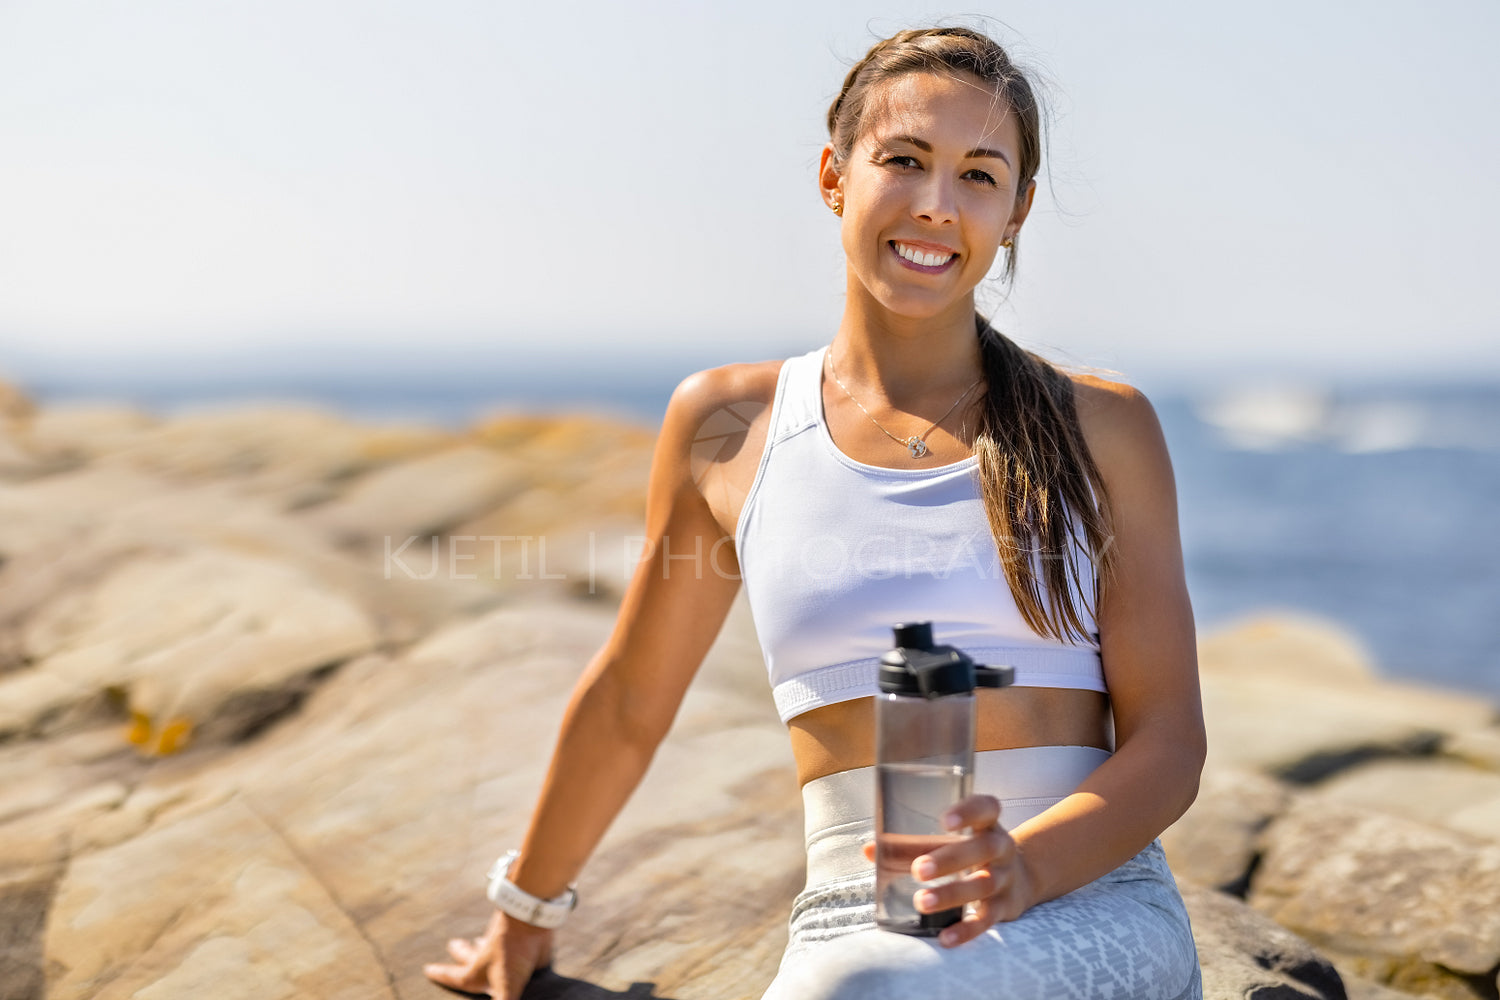 Fit Woman Taking Break During Outdoor Workout